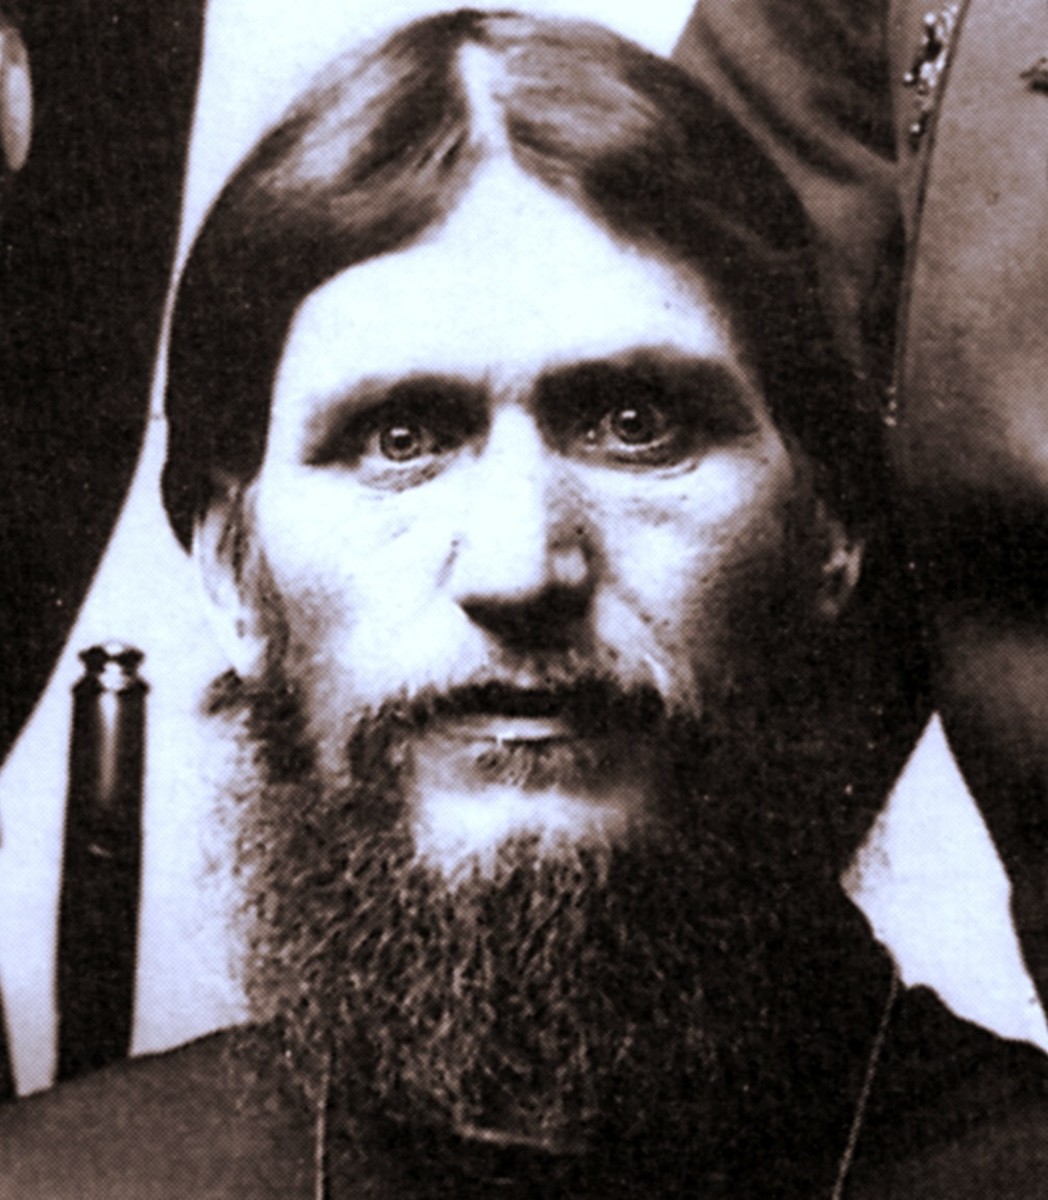 Rasputin found his place in history.